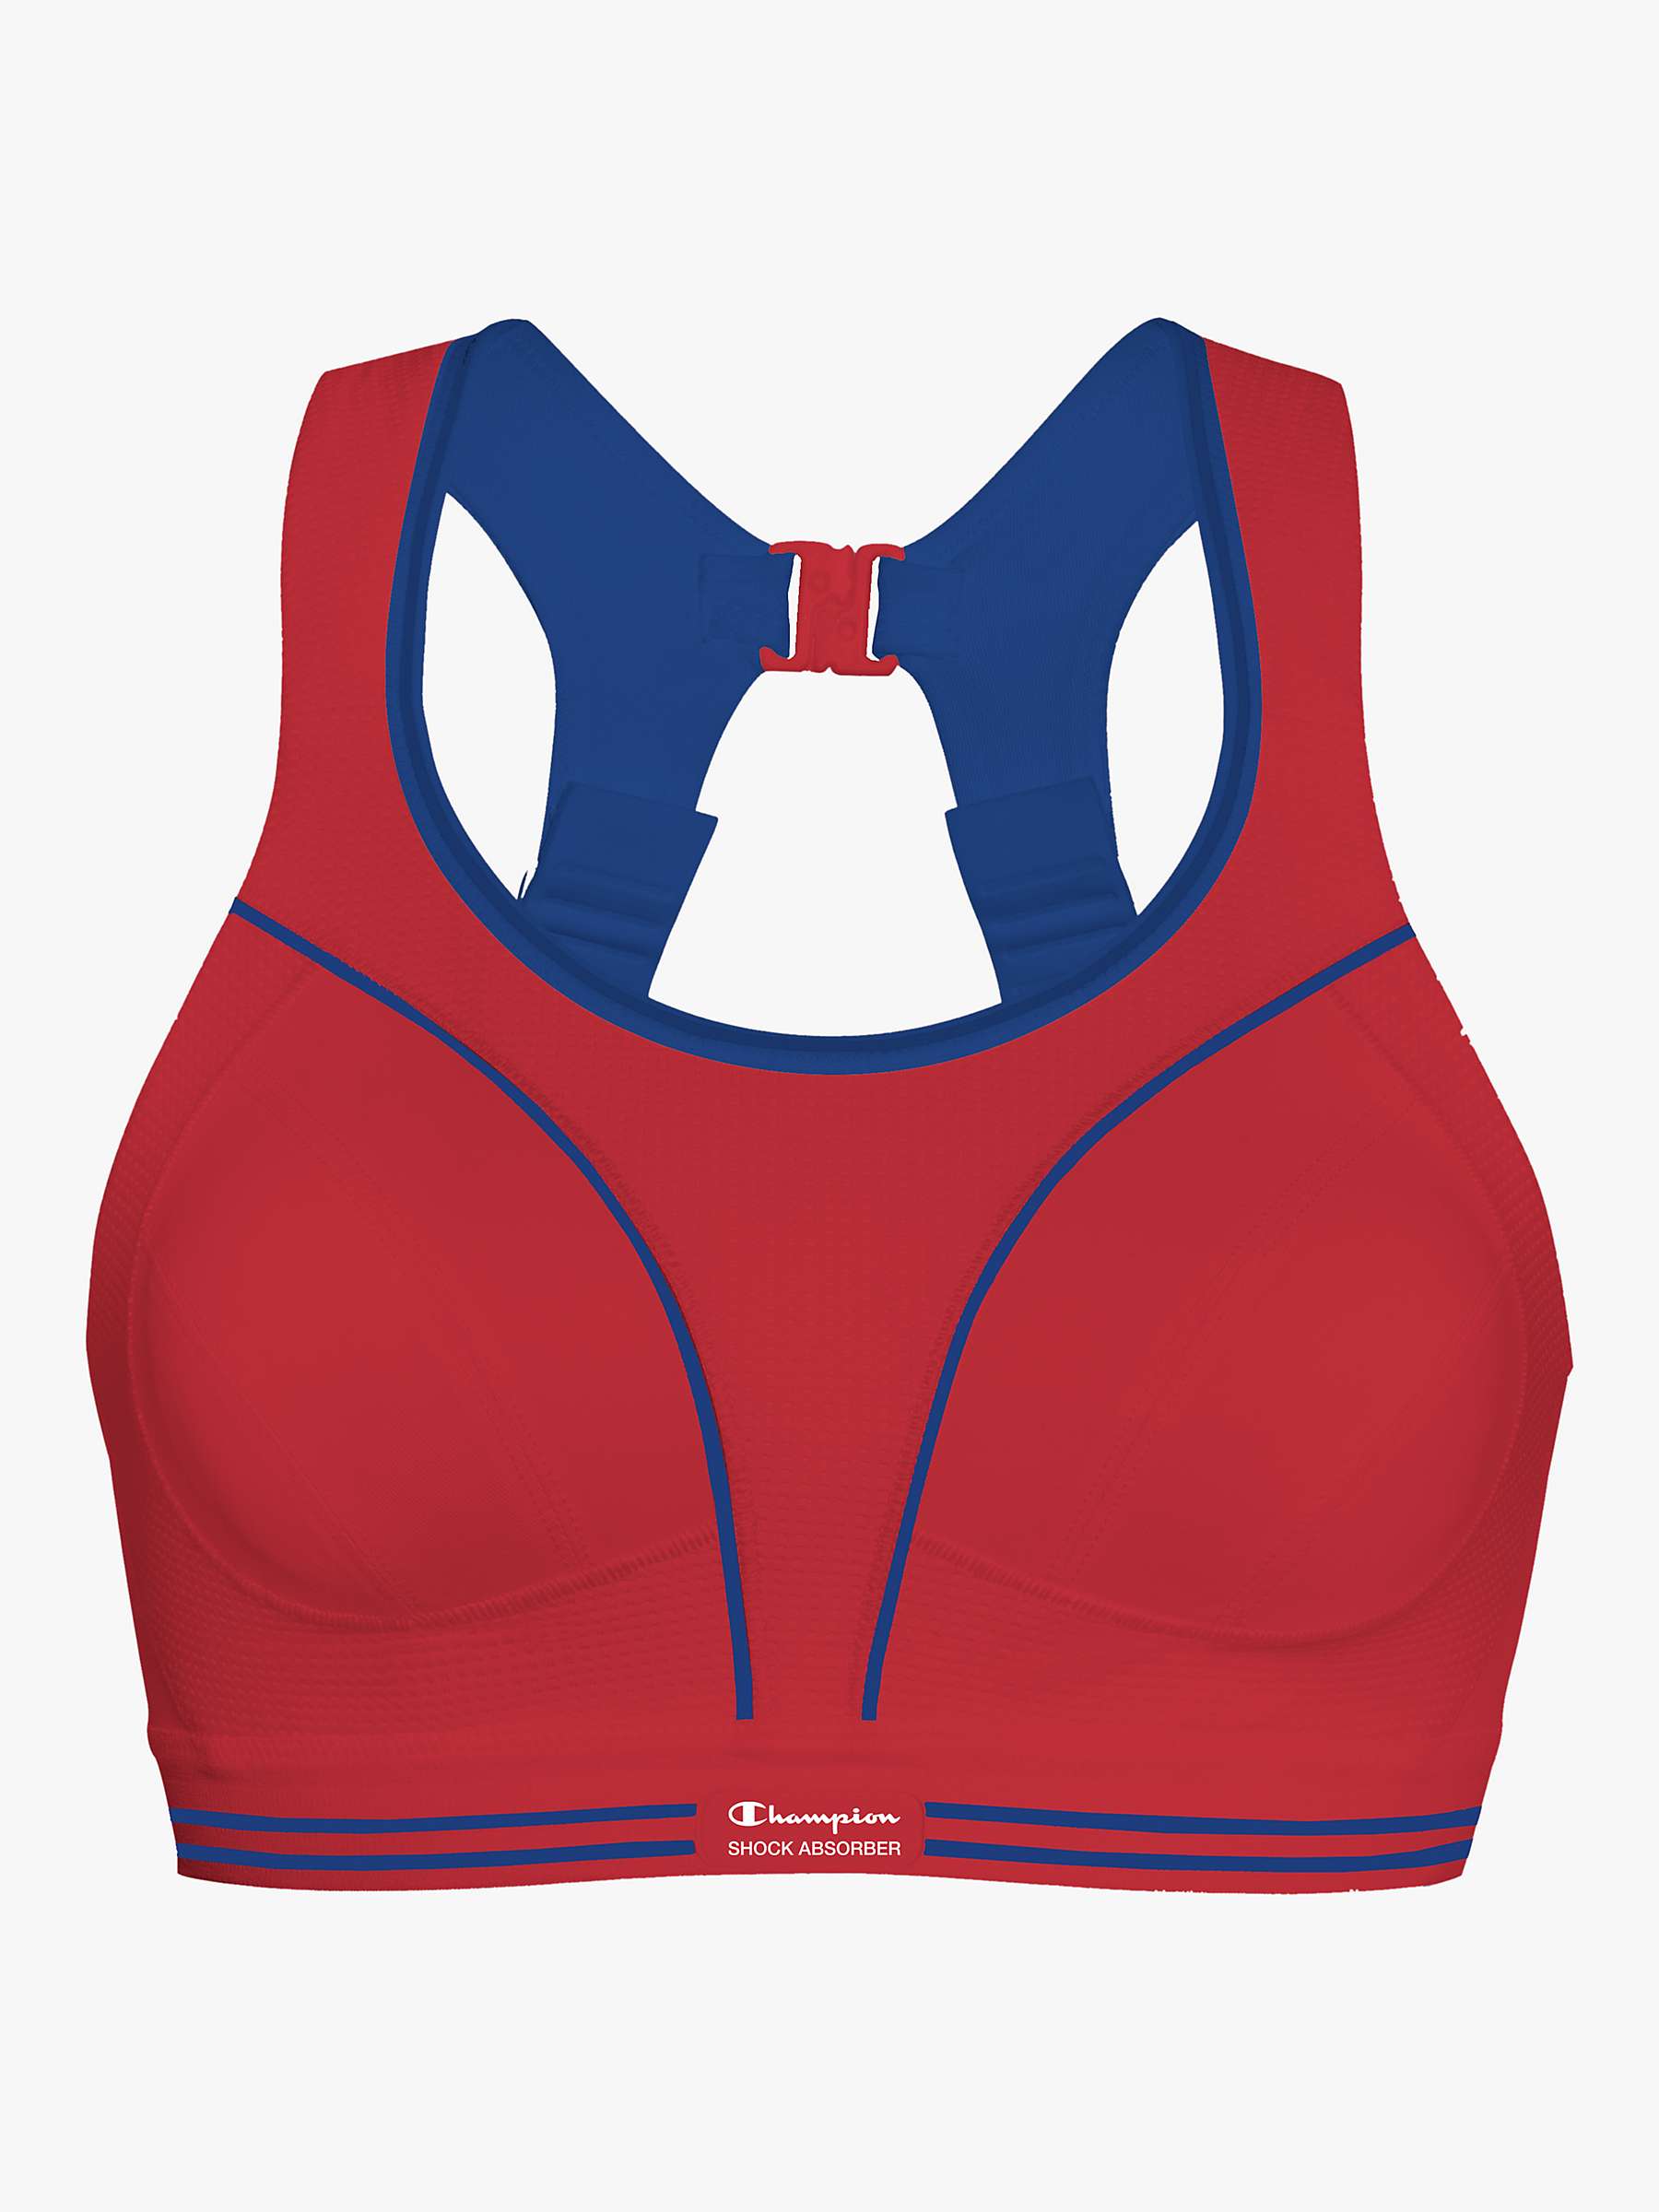 Buy Shock Absorber Ultimate Run Non-Wired Sports Bra Online at johnlewis.com